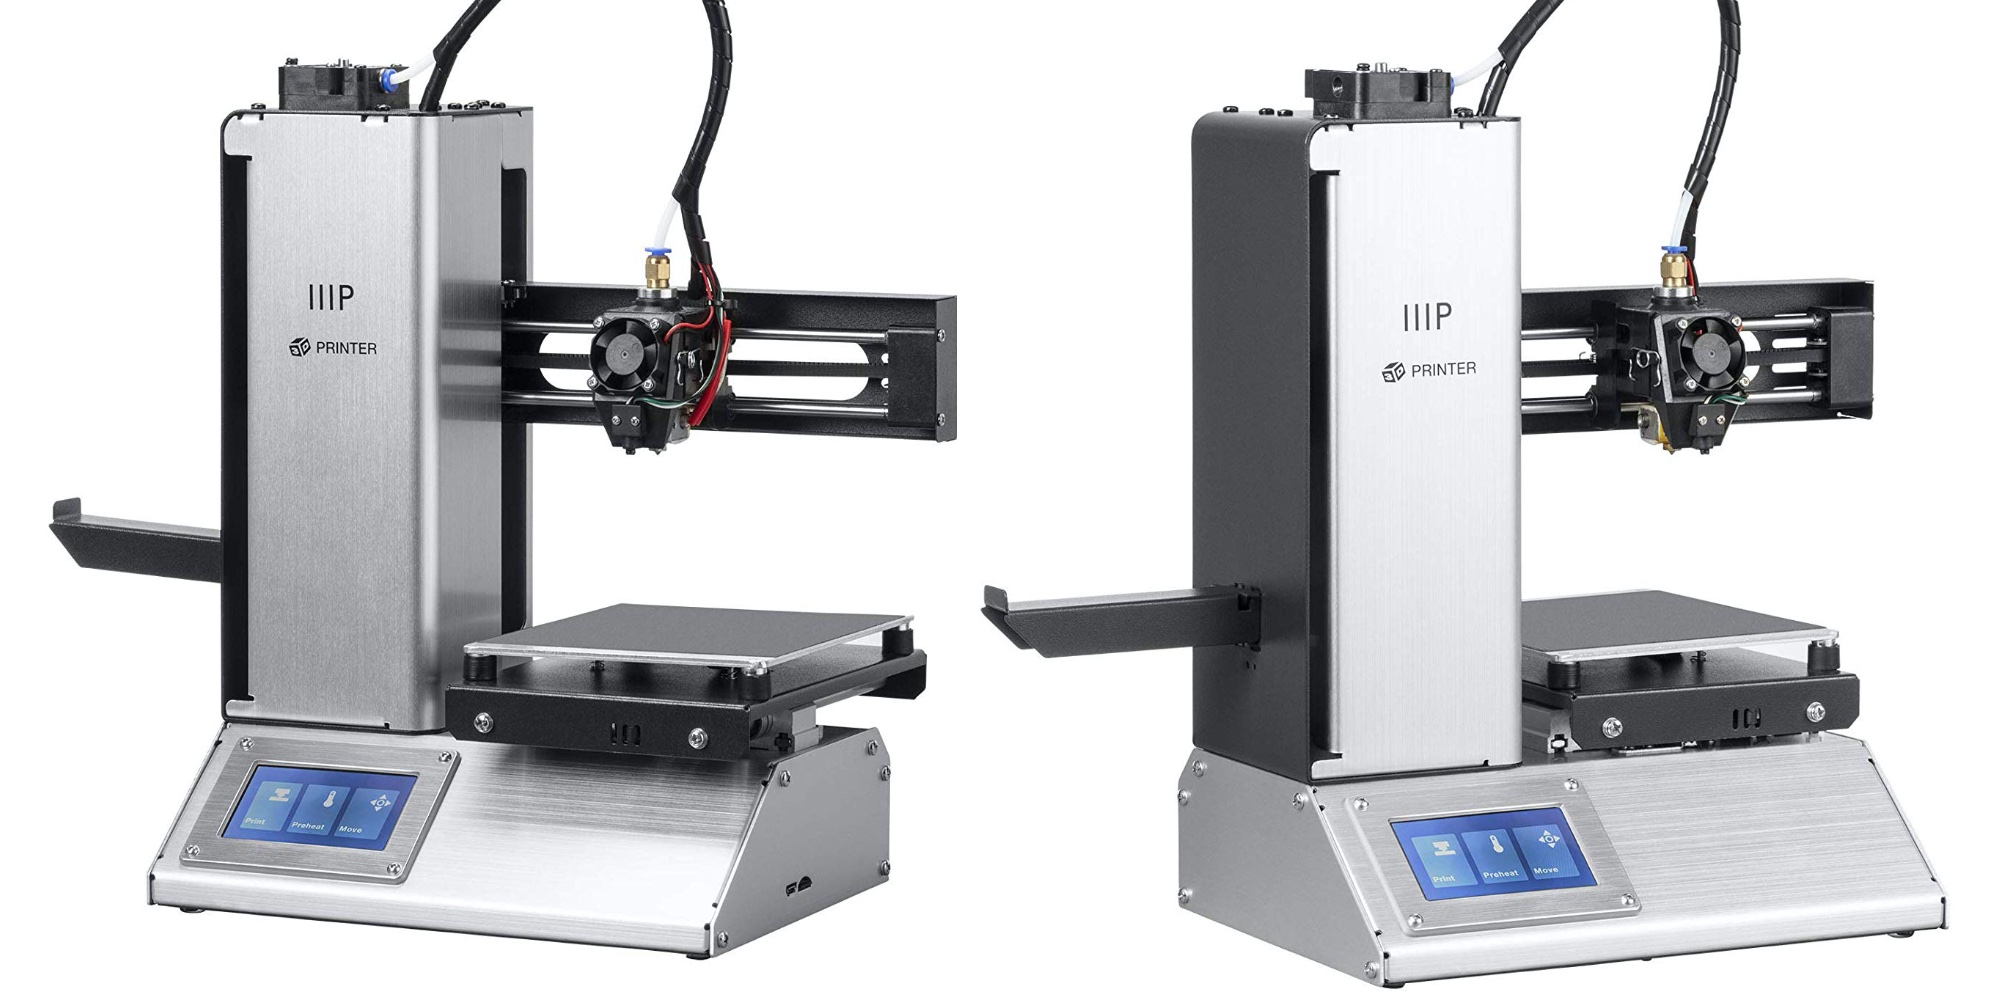 Monoprice's MP Select Mini Pro 3D Printer returns to all-time low at $170